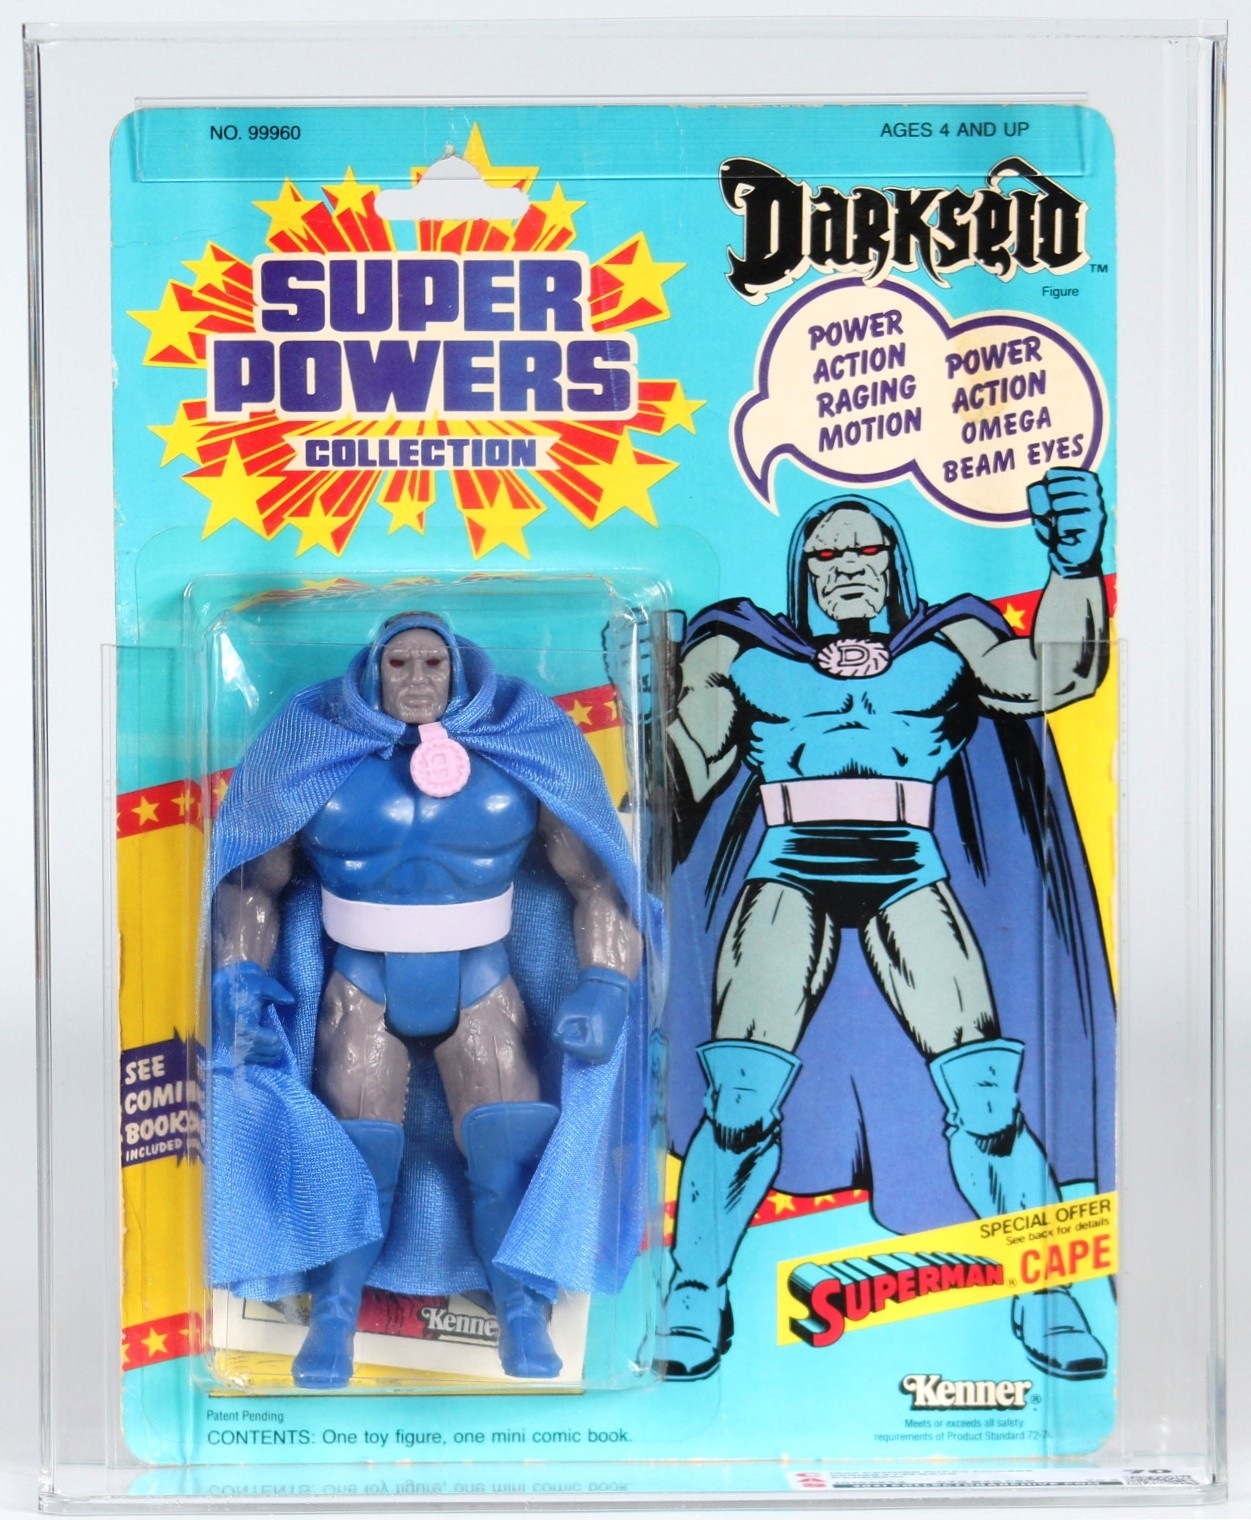 1985 Kenner Super Powers Carded Action Figure - Darkseid